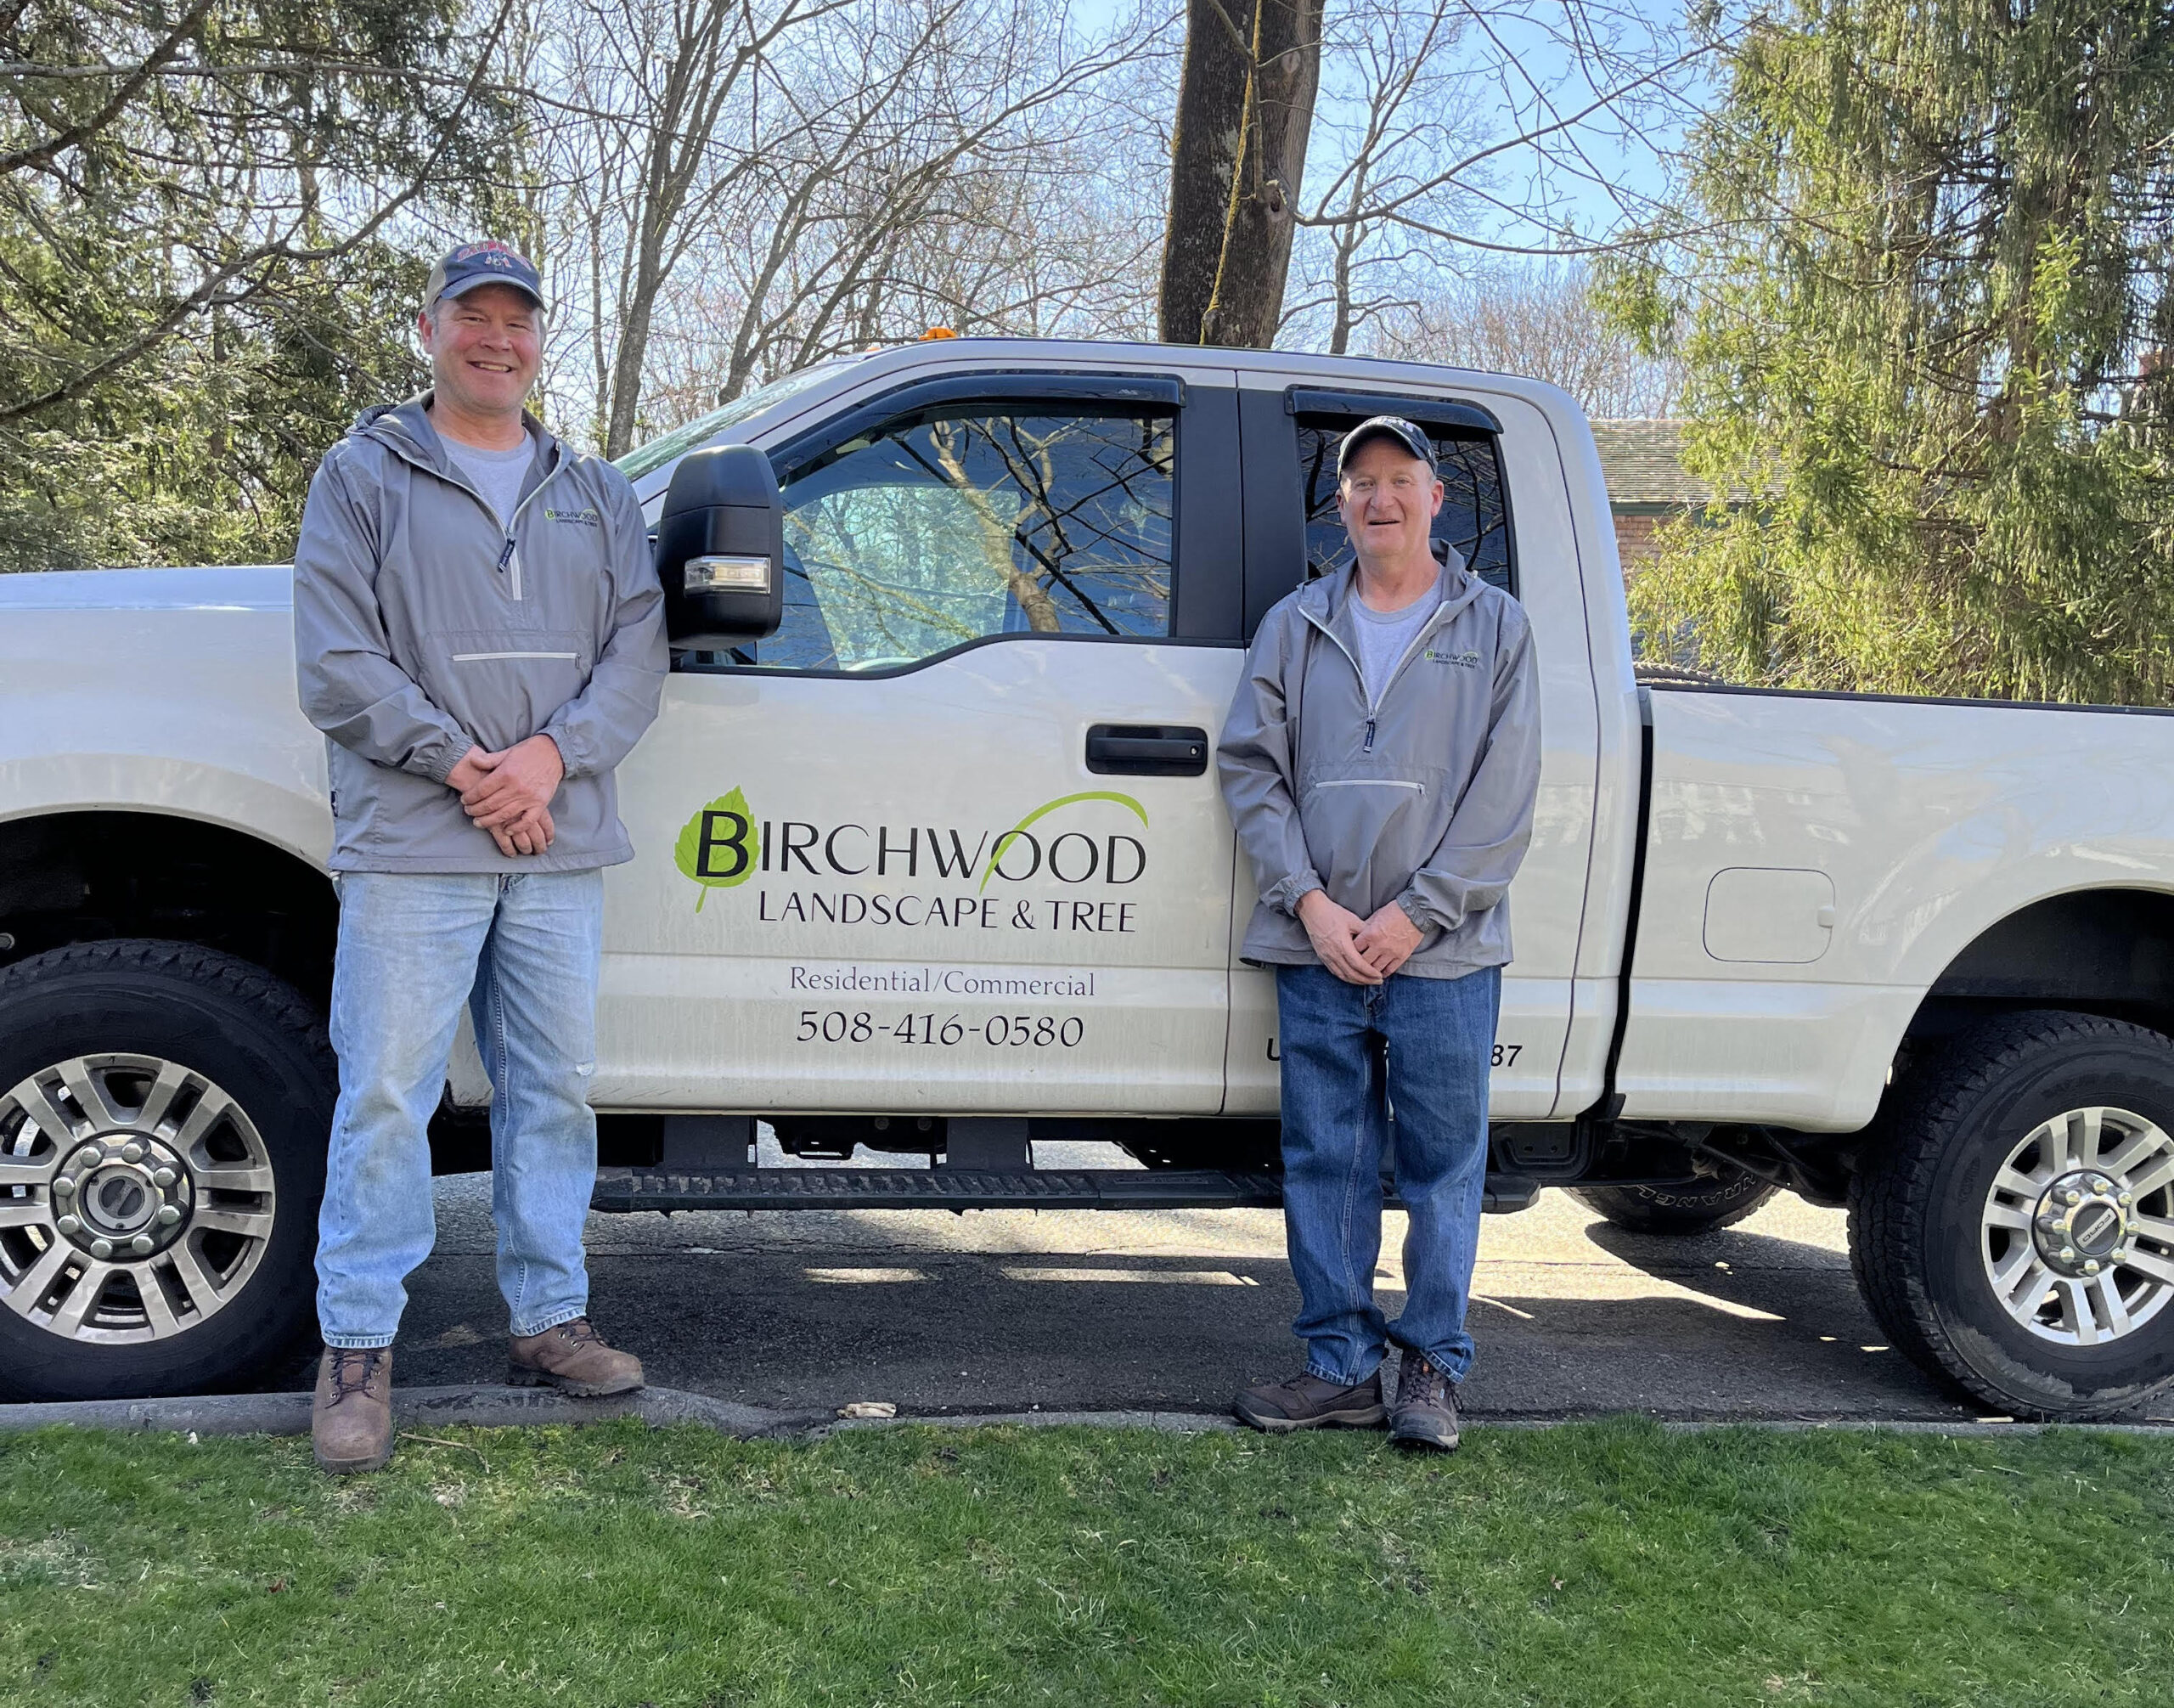 Business Profile: Birchwood Landscape and Tree provides protection, beautification